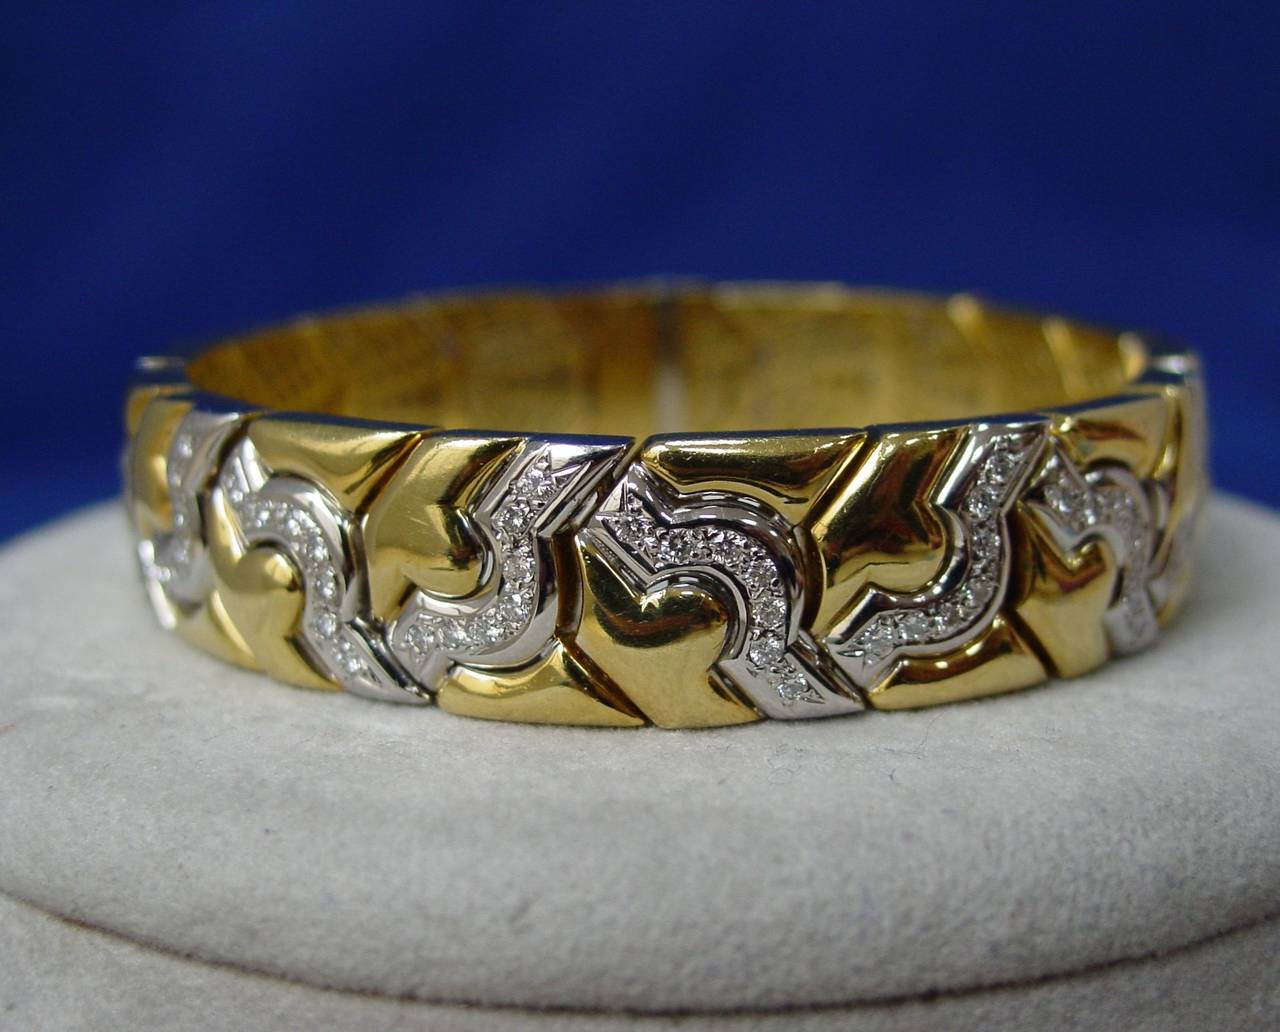 An 18 Karat Yellow and White Gold Diamond Bracelet. This flexible link bracelet features an abstract design of round brilliant diamonds set in 18 karat white gold with an approximate weight of 1.90 carats. 7 1/2